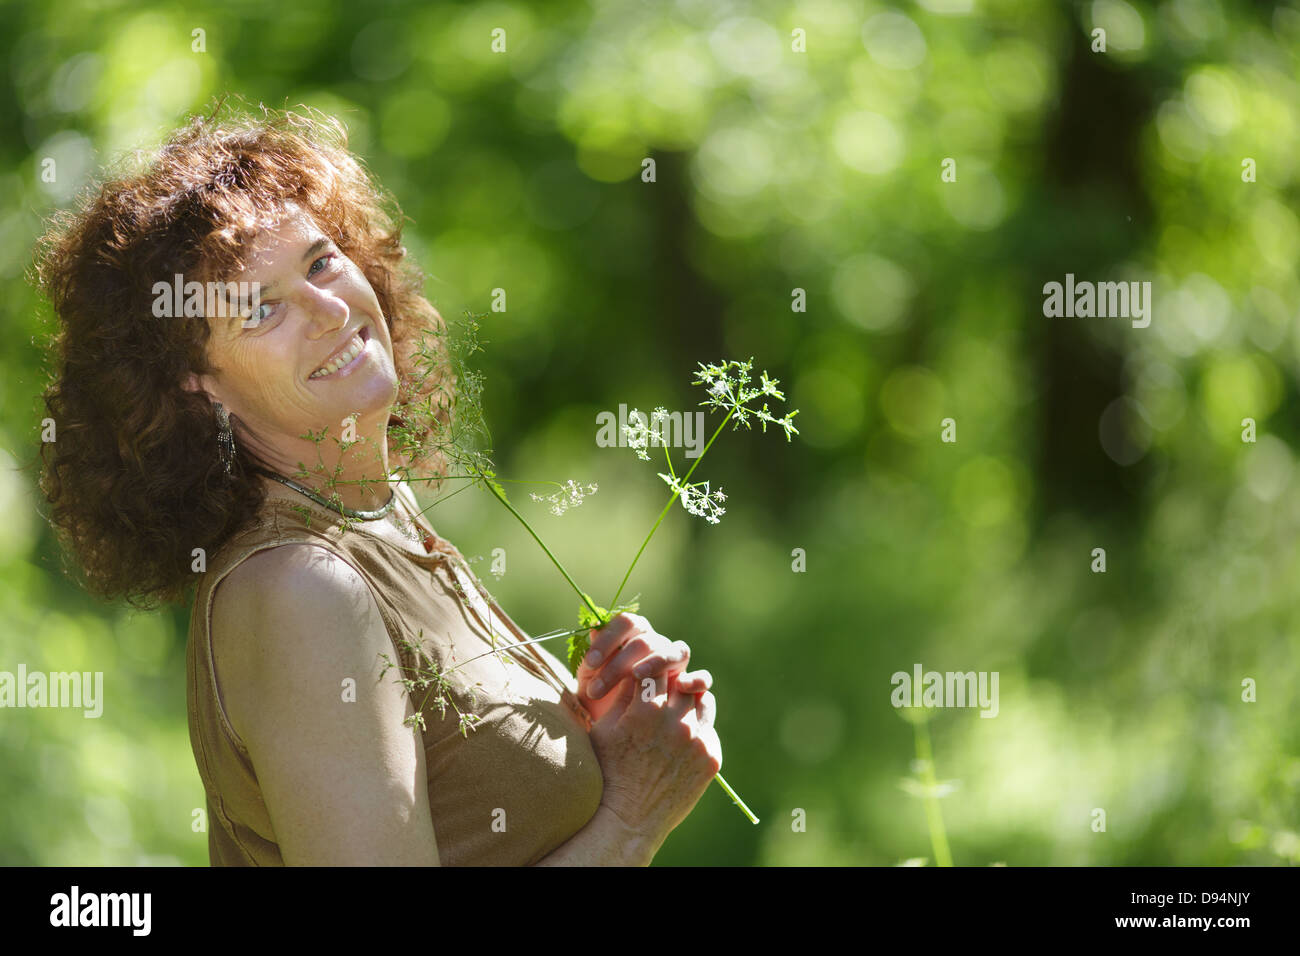 Middle aged mature woman enjoying nature holding wildflower in forest Stock Photo